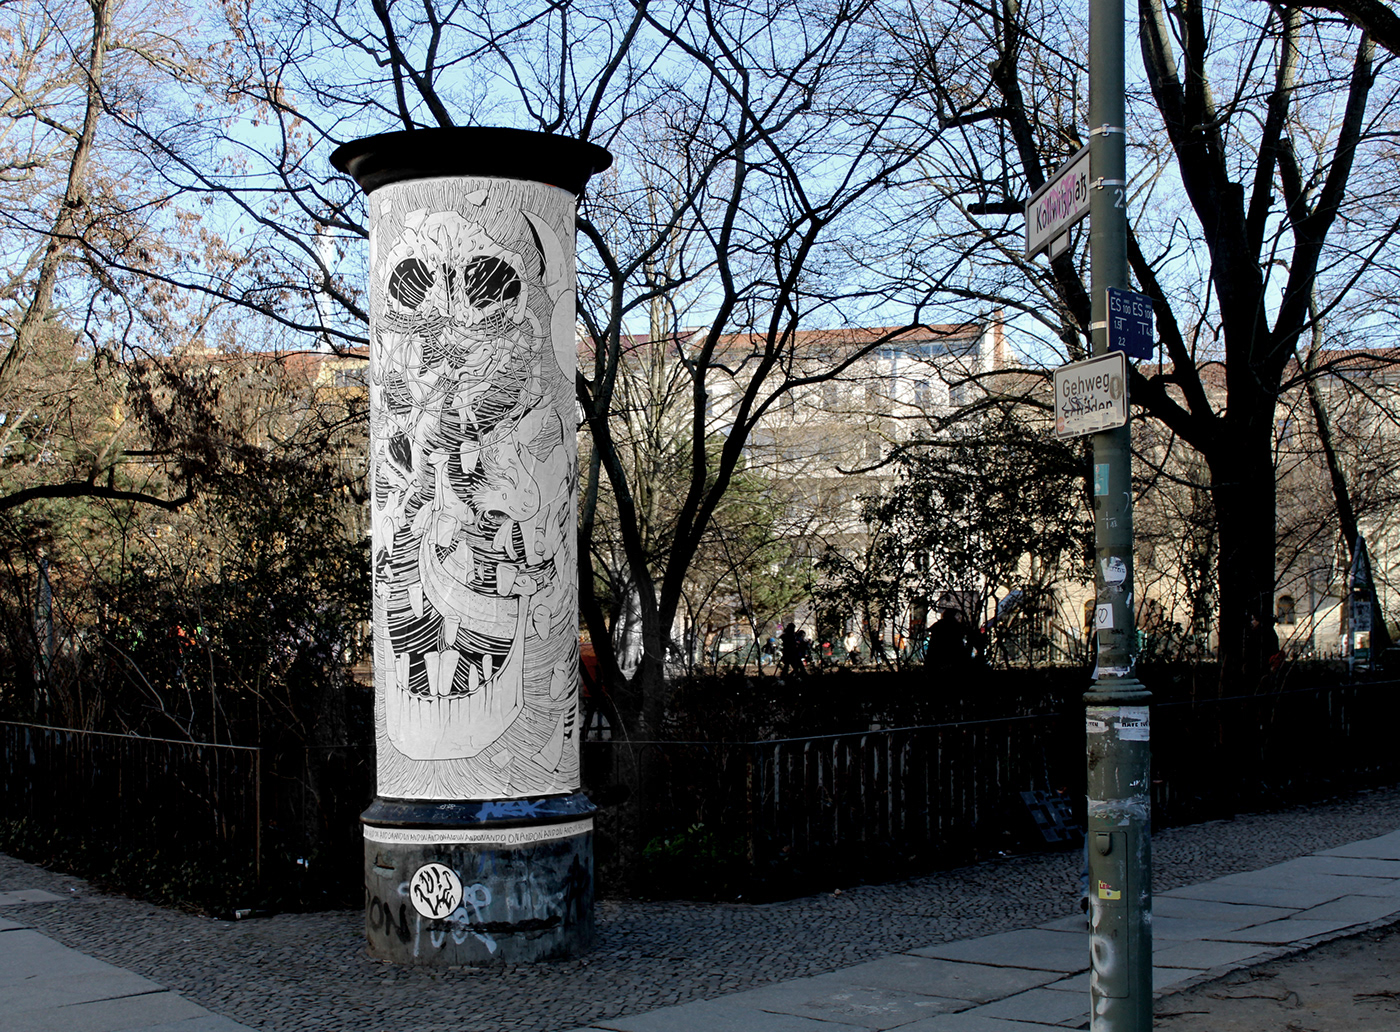 A big exploding face done as part of the Litfass goes urban art project in Berlin.